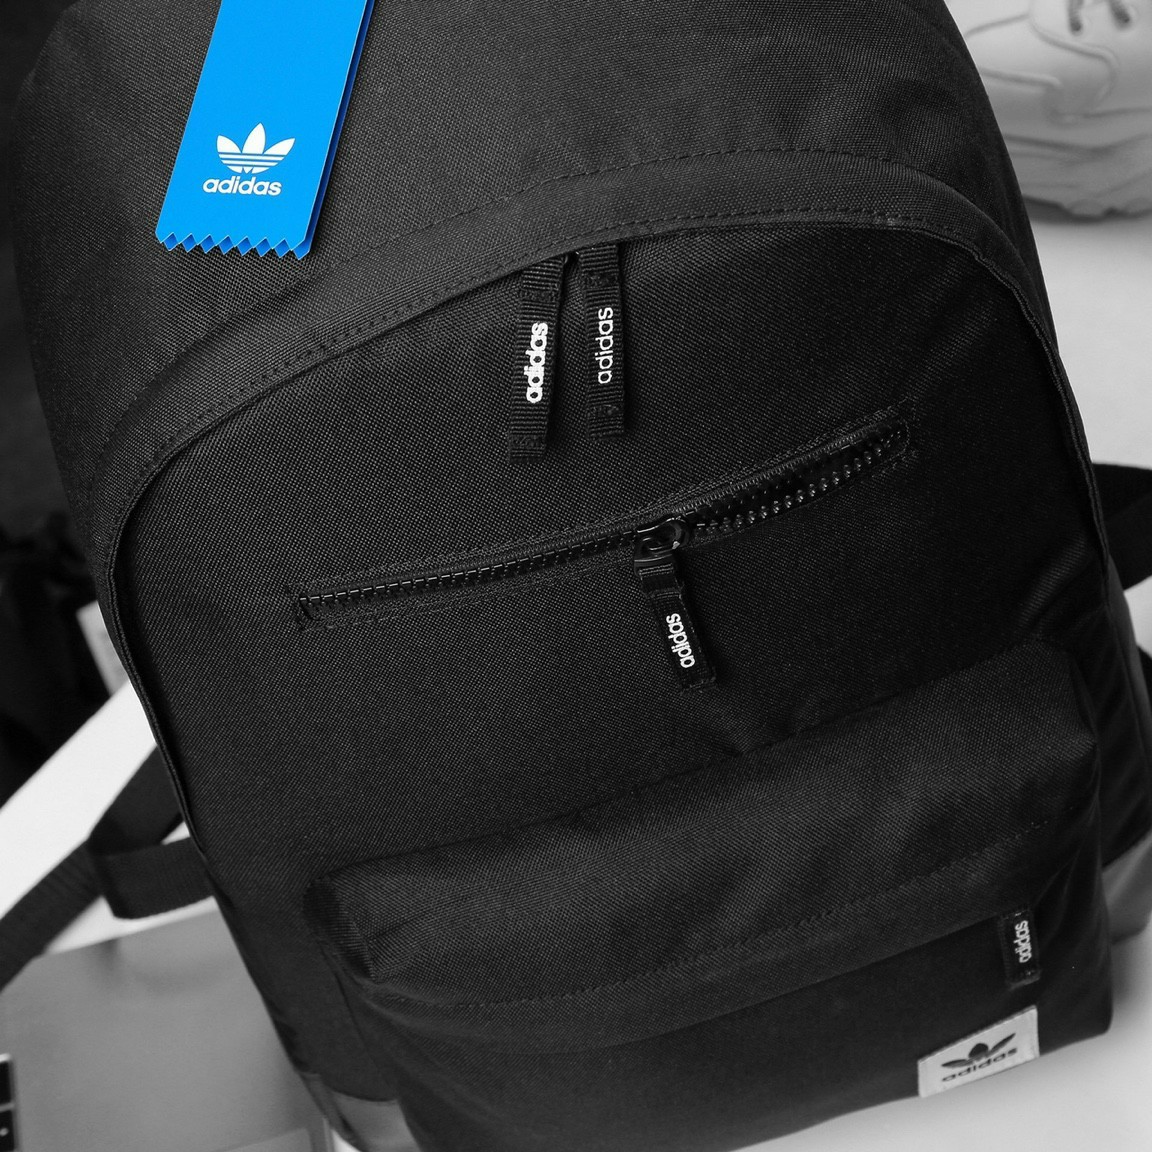 BALO THỂ THAO ADIDAS BACKPACK 3